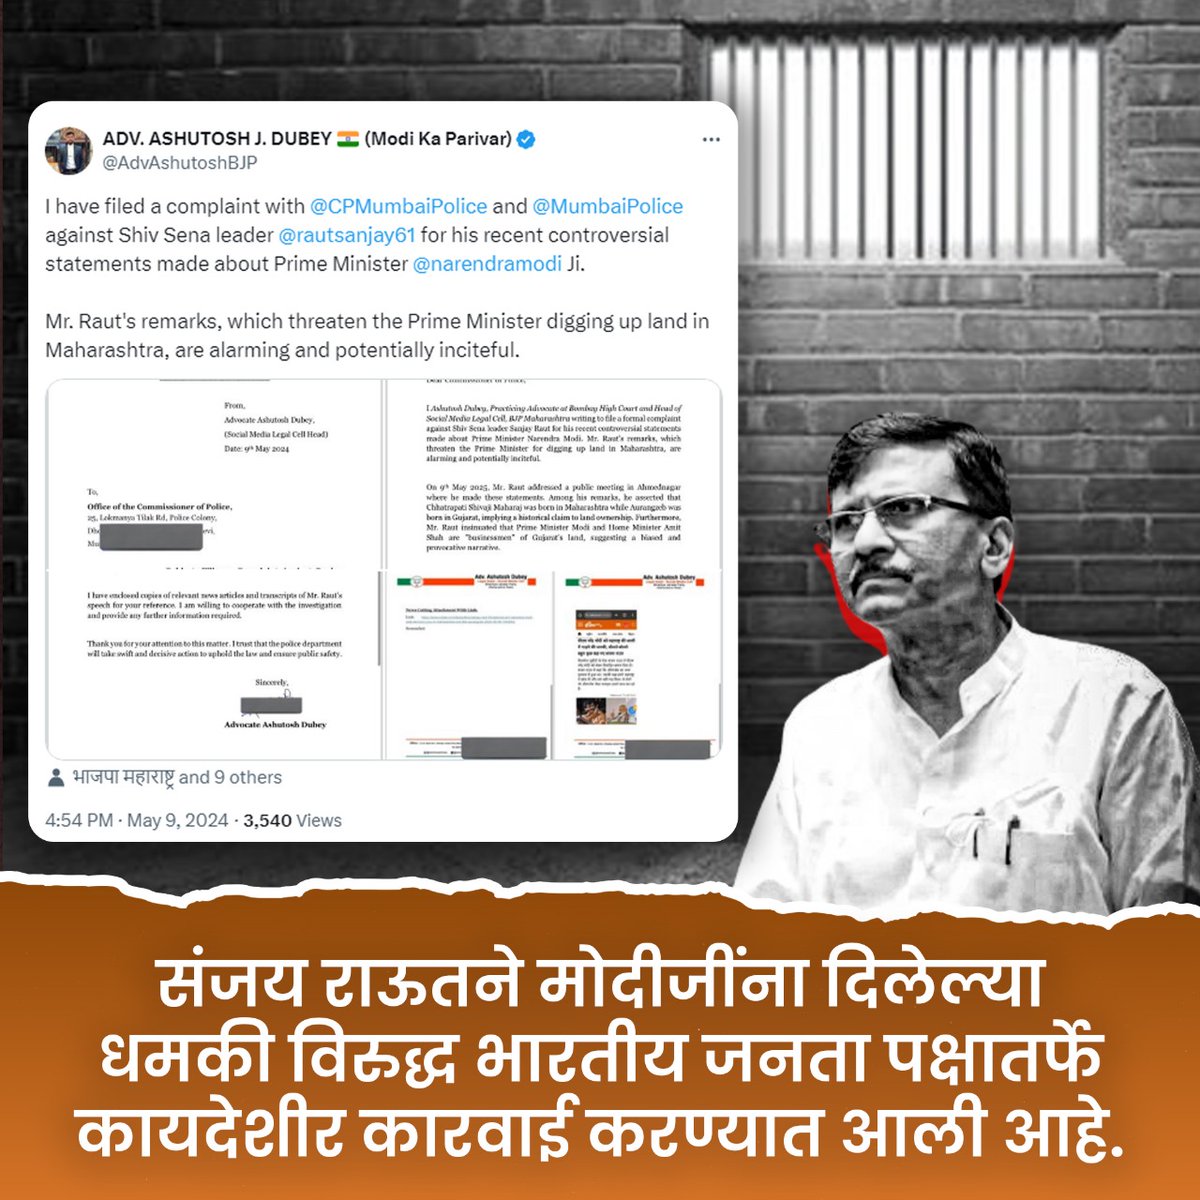 Sanjay Raut's statement reflects poorly on his character and responsibility as a public representative. He should apologize without delay. #संजय_राउत_माफी_मांगो